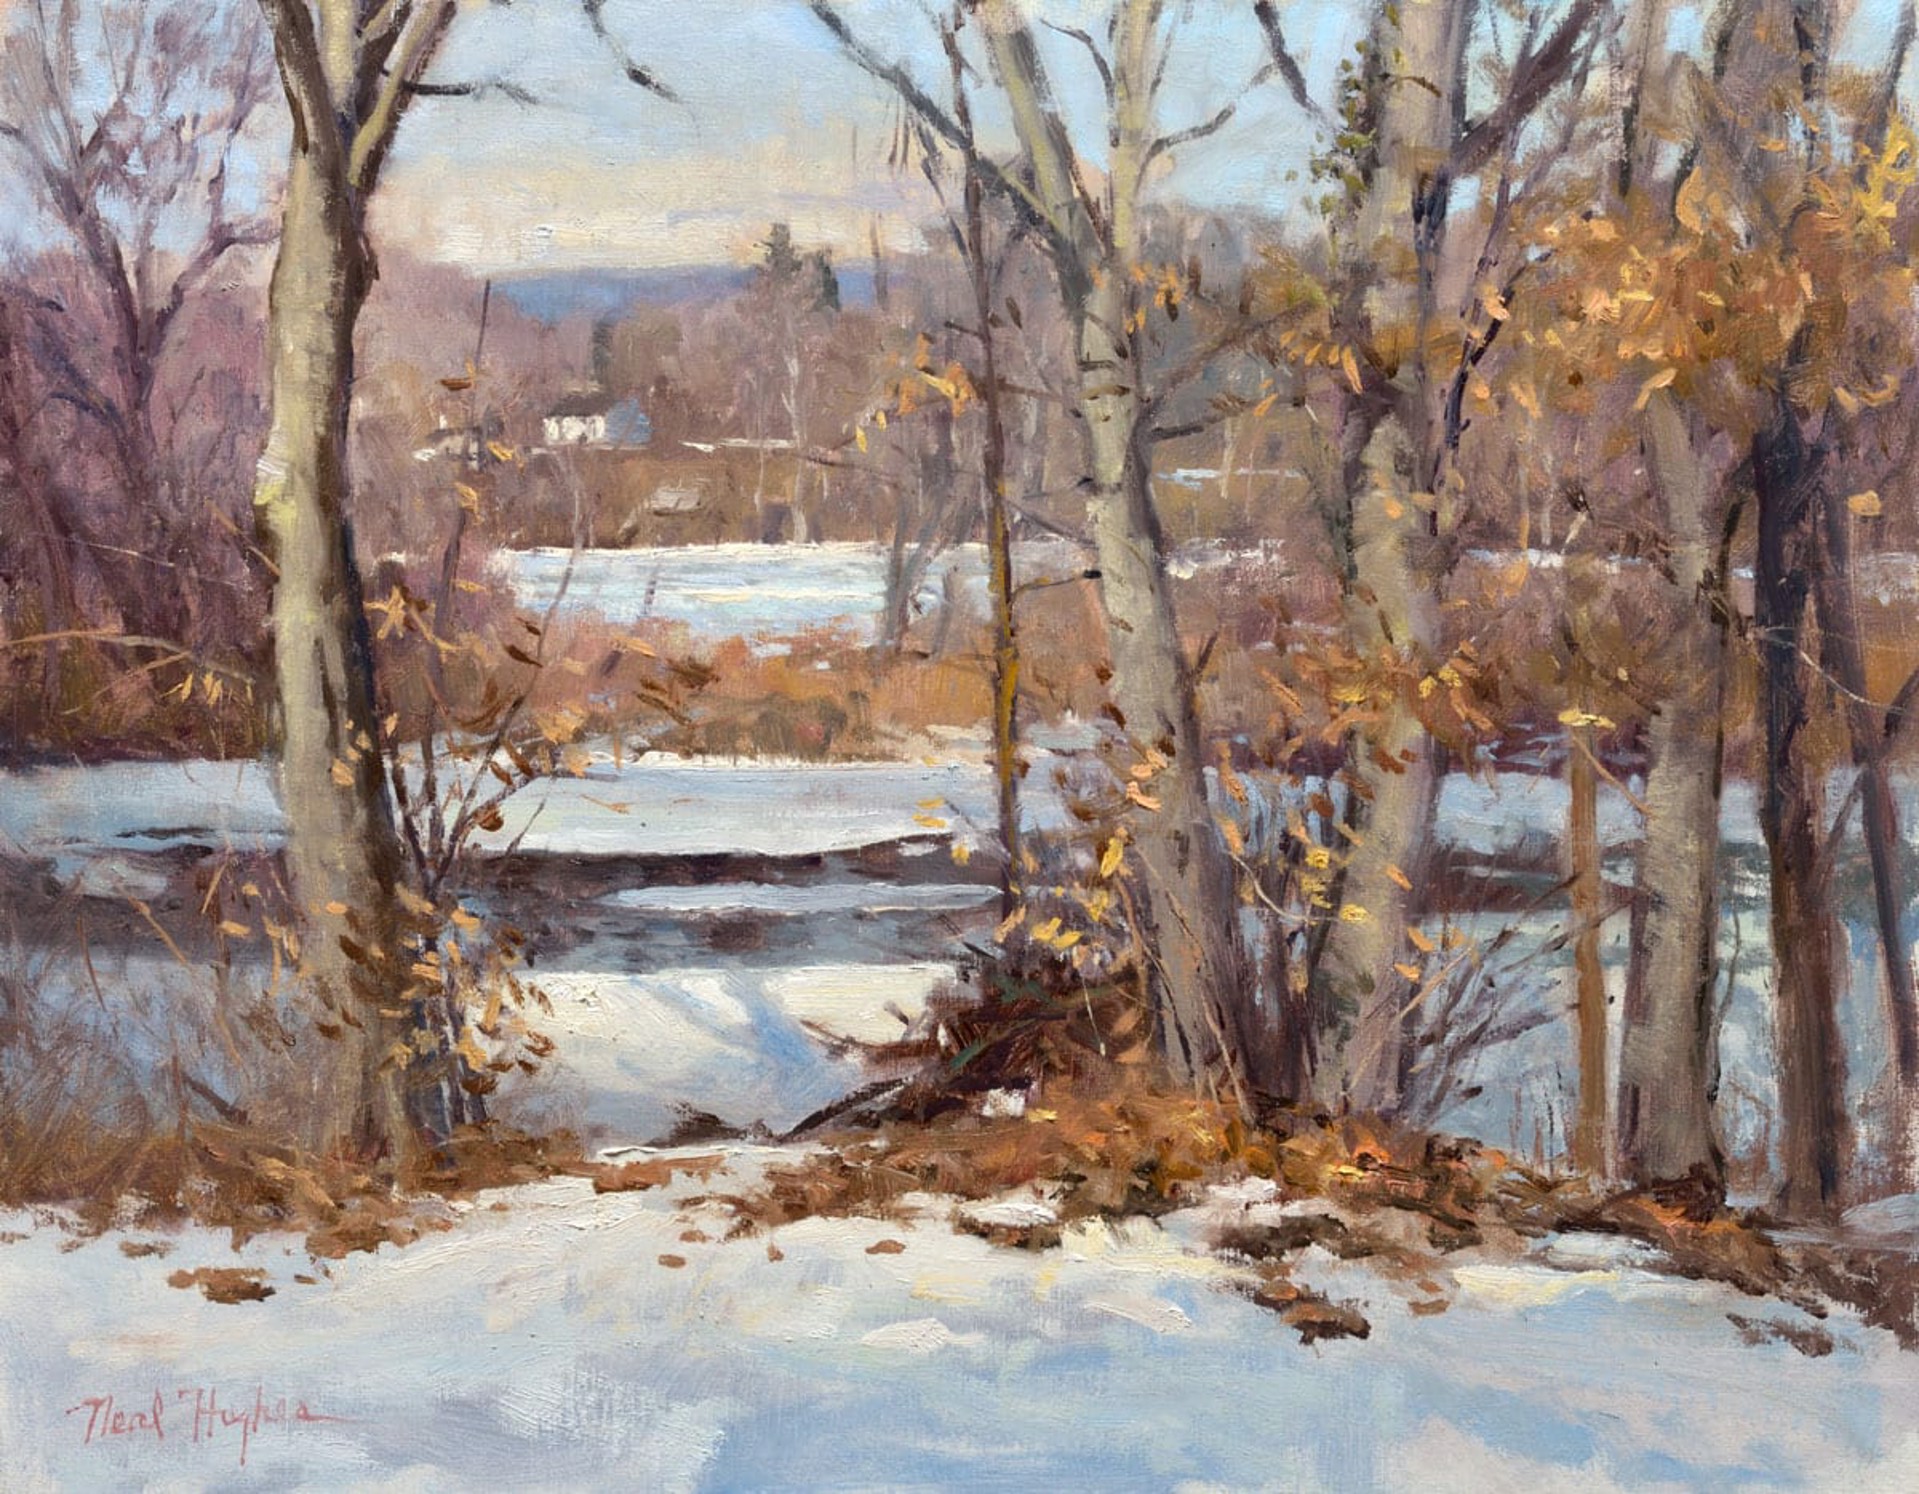 River Snow by Neal Hughes